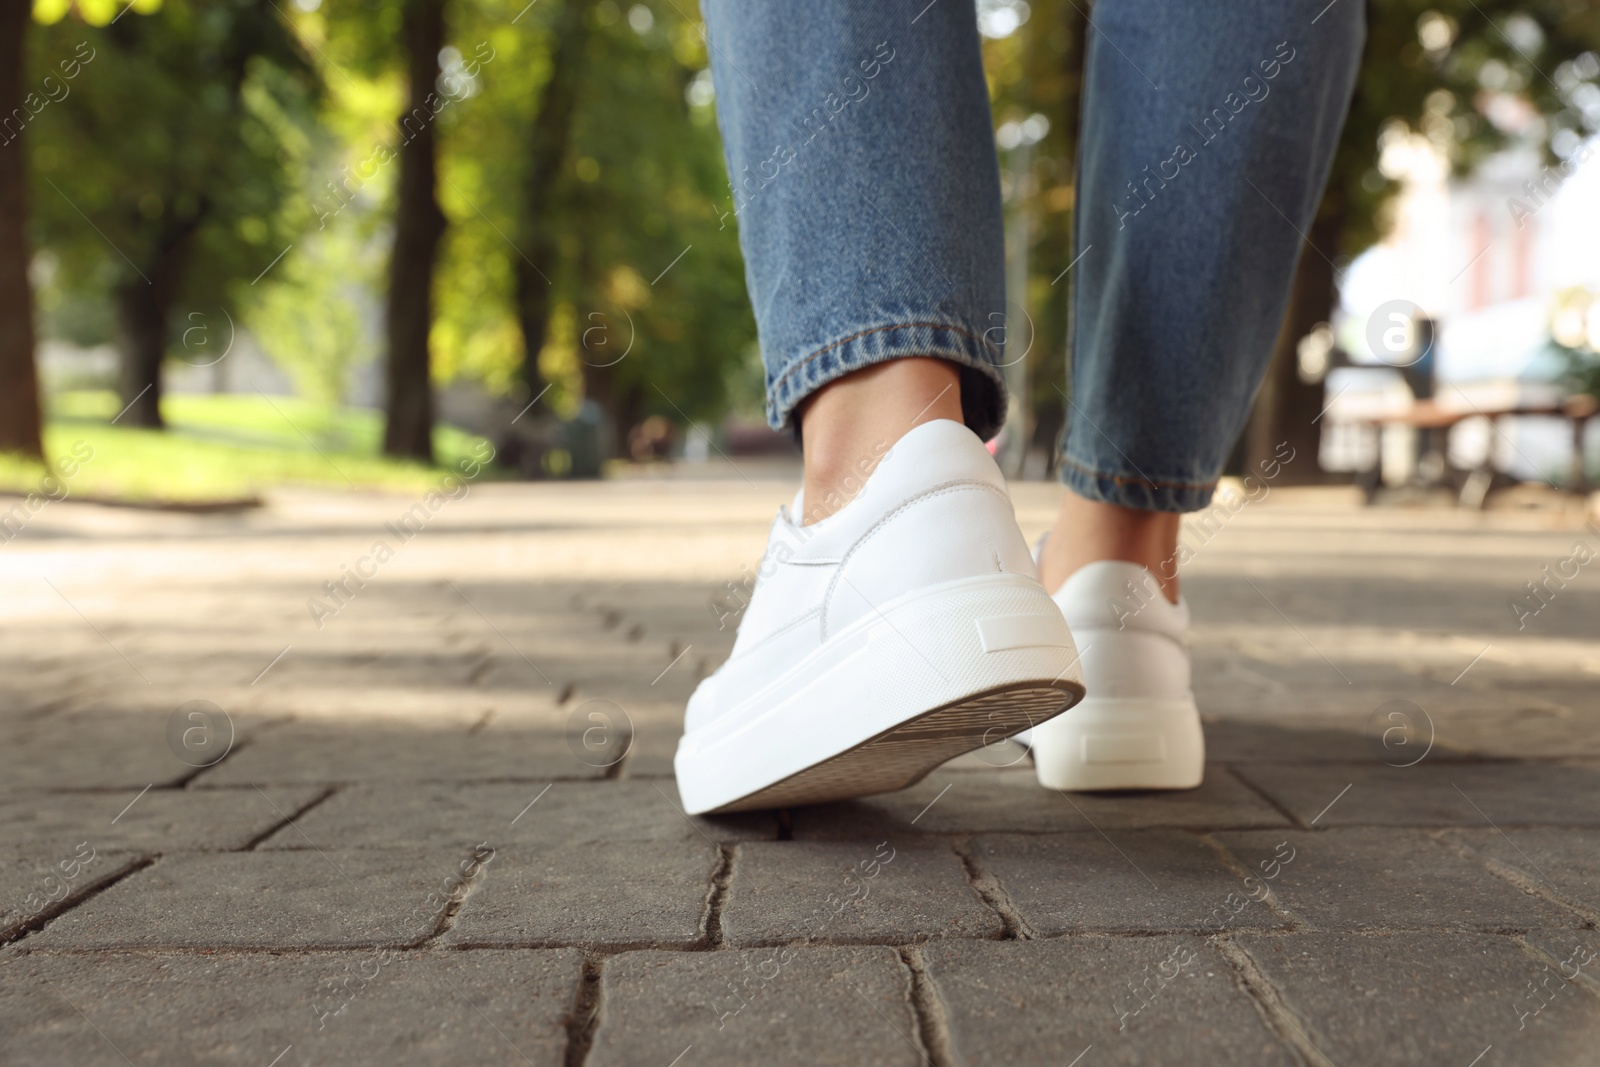 Photo of Woman in stylish sneakers walking on city street, closeup. Space for text